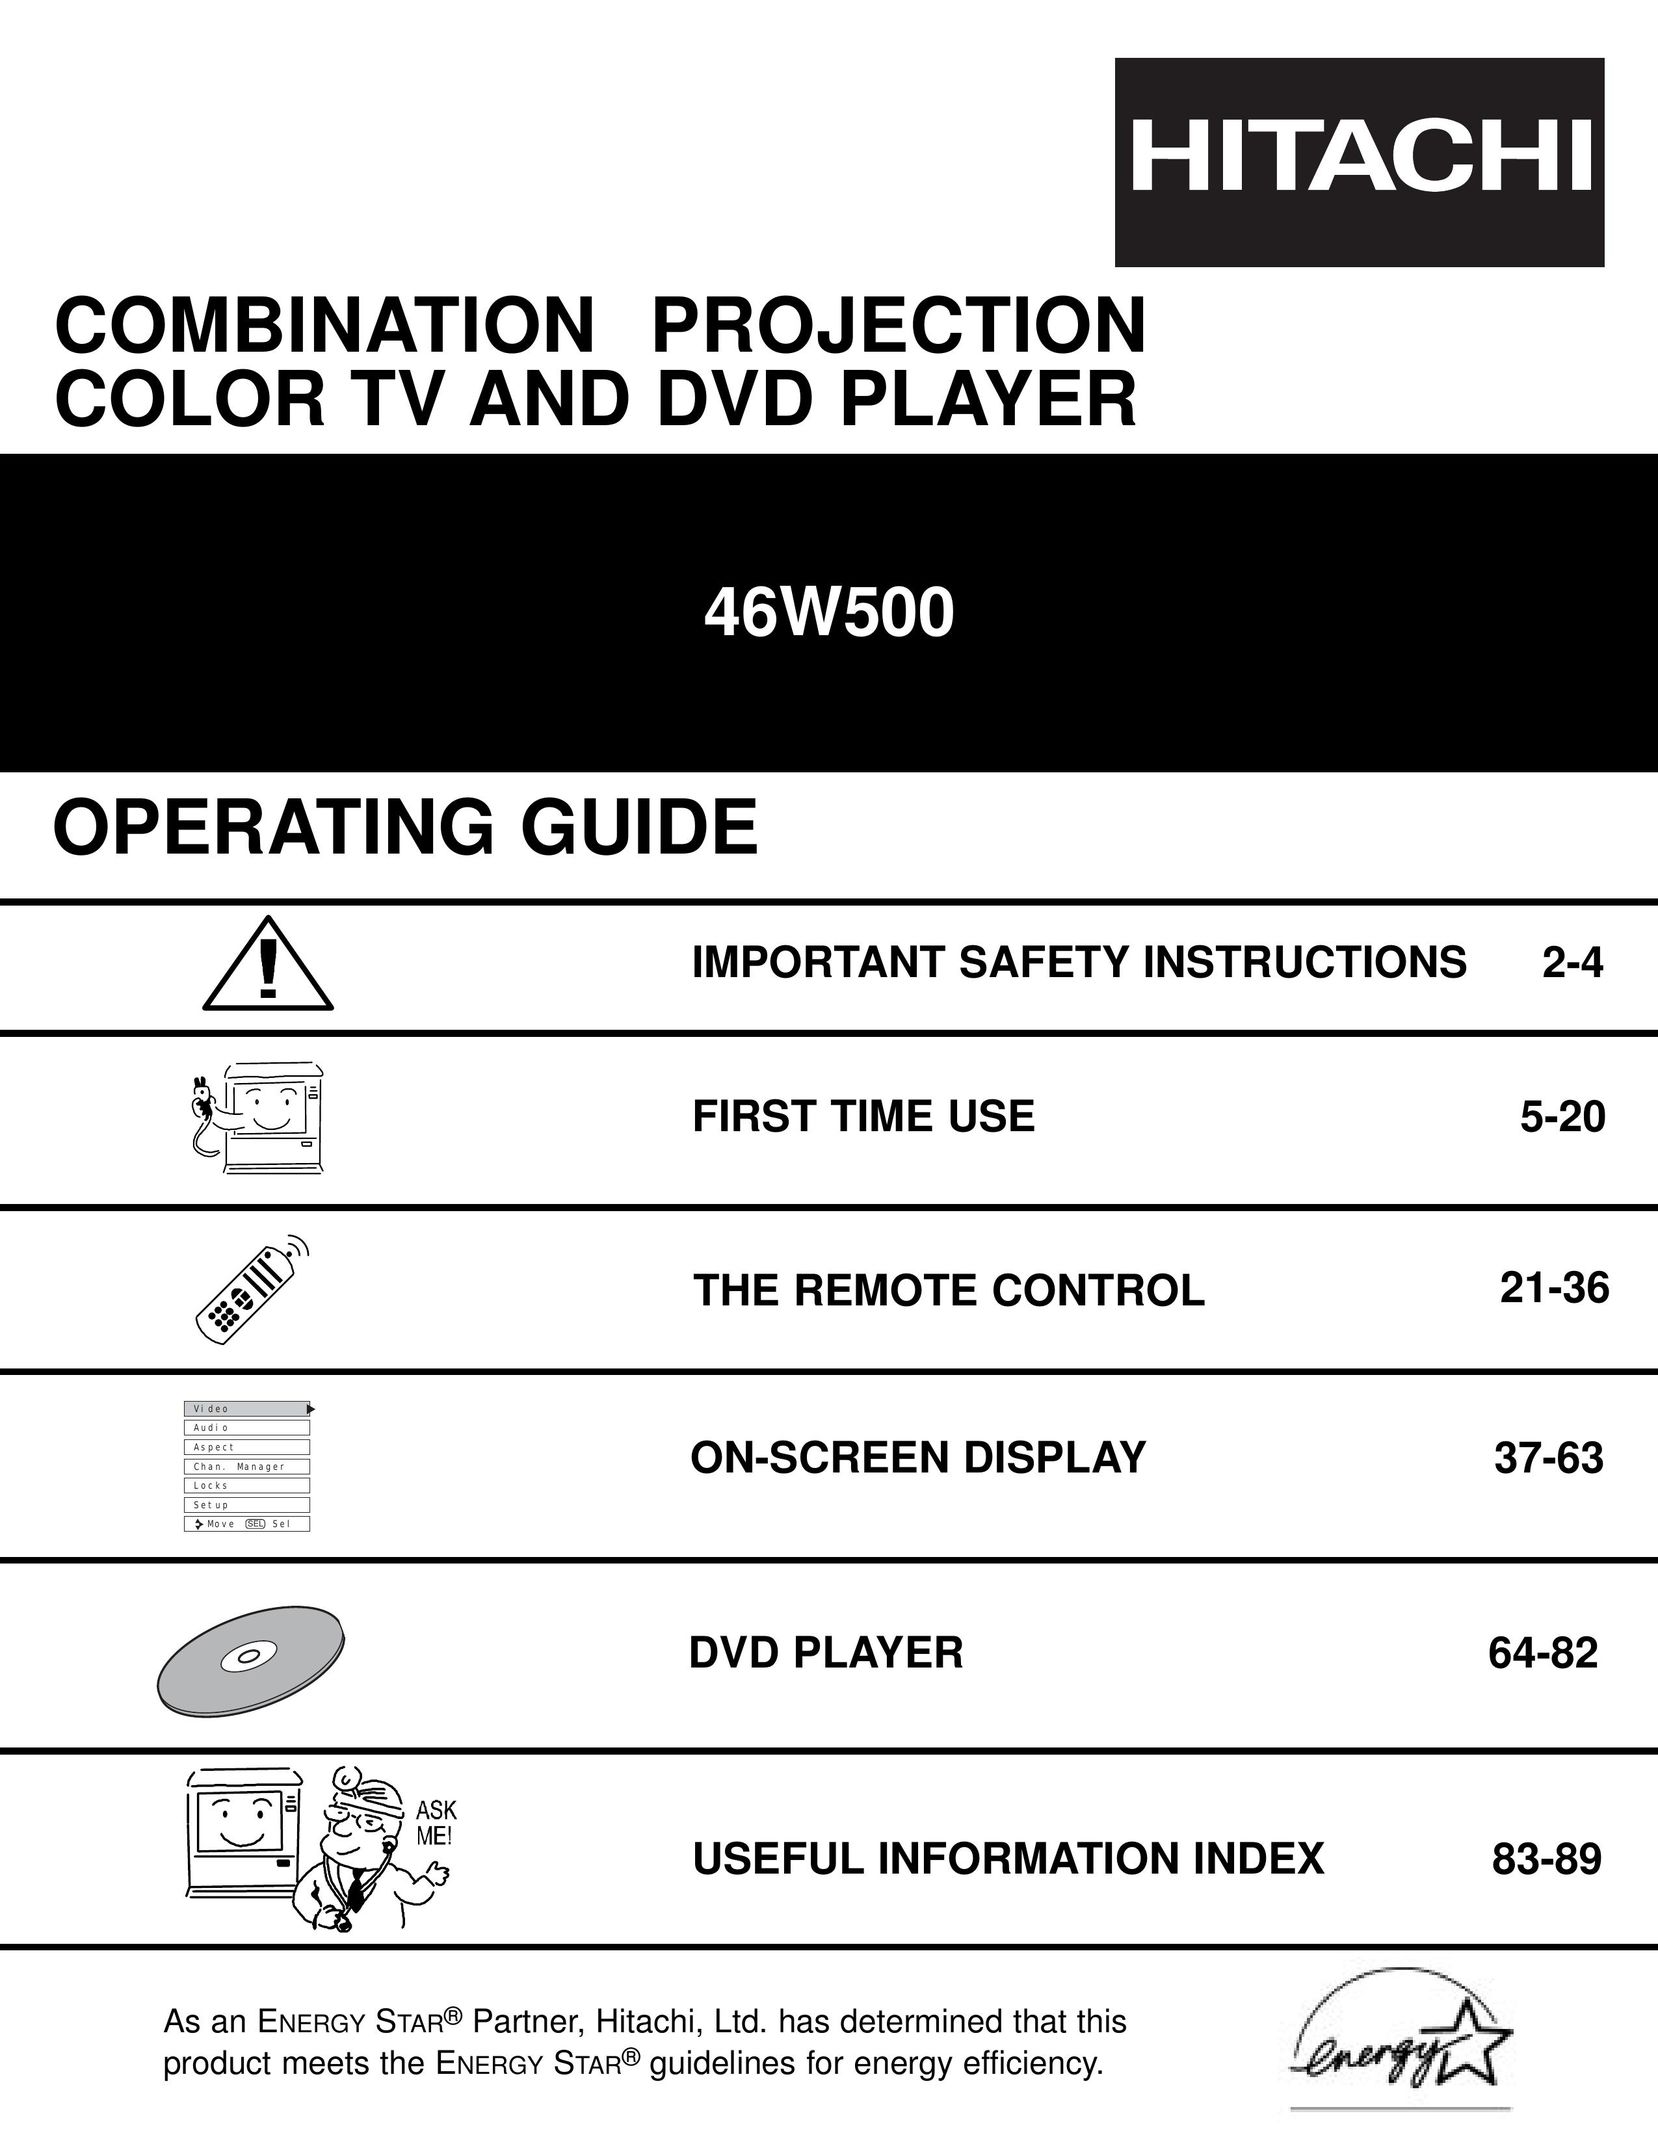 Hitachi 46W500 Projection Television User Manual